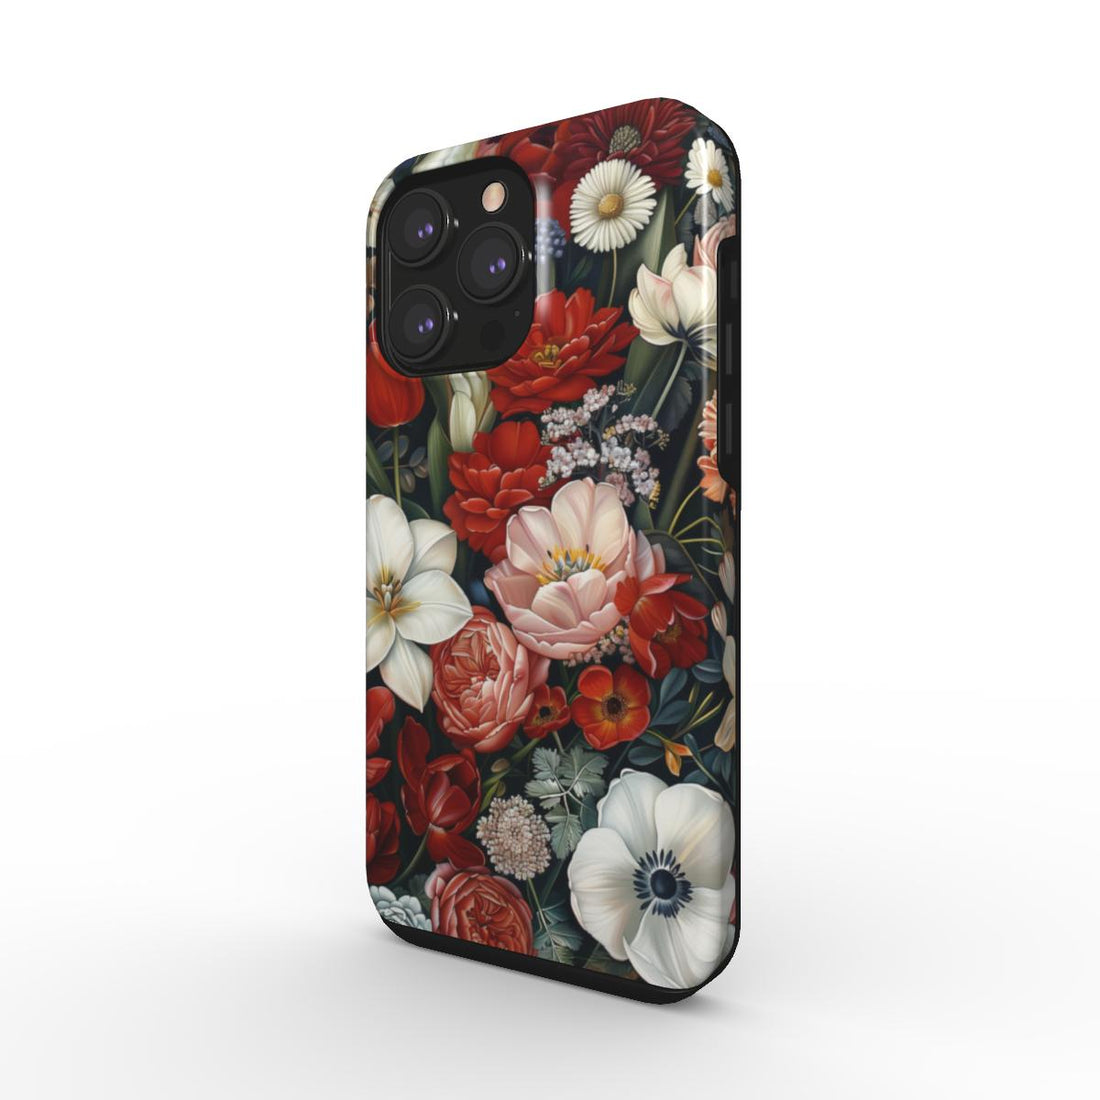 Blooming Harmony: The Ultimate Floral Phone Case